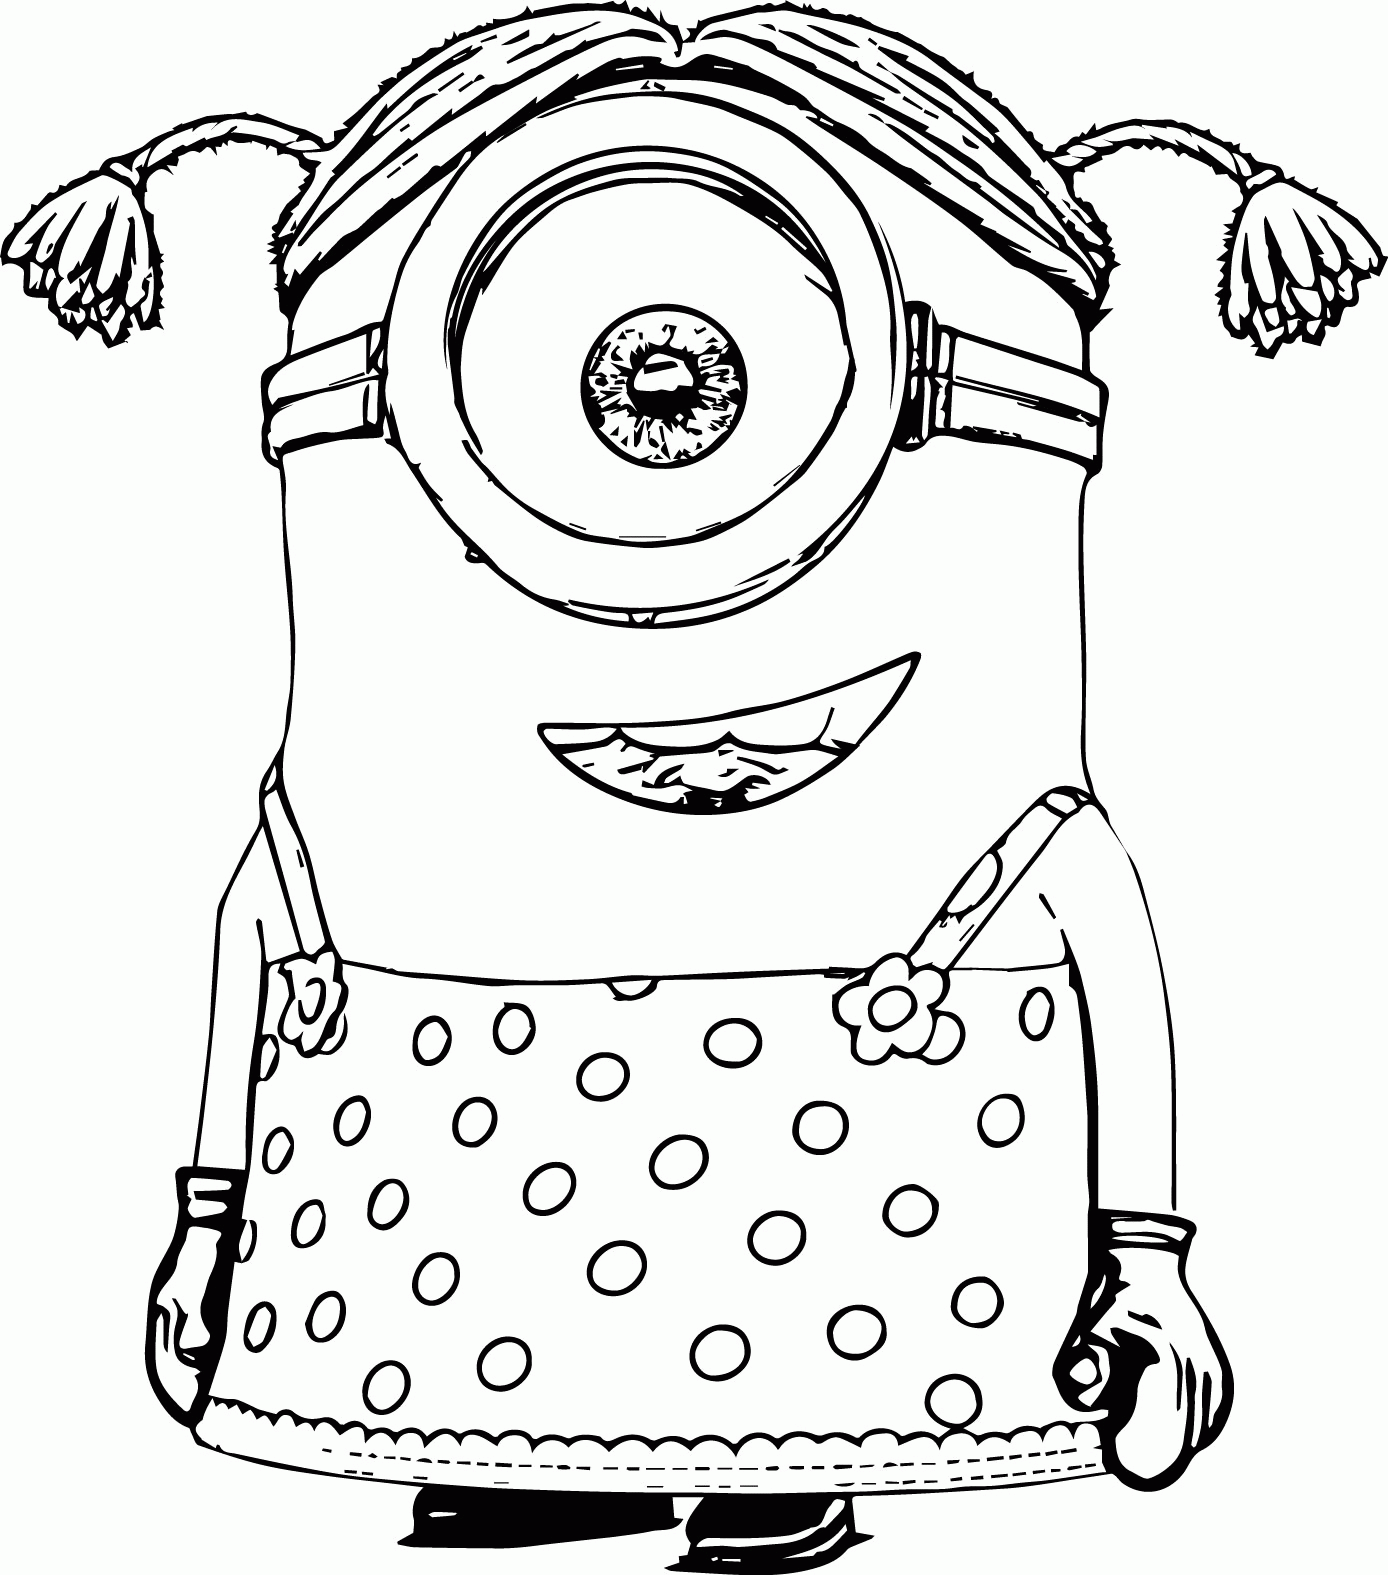 Cartoons_Minions_little_girl_coloring_page | Wecoloringpage